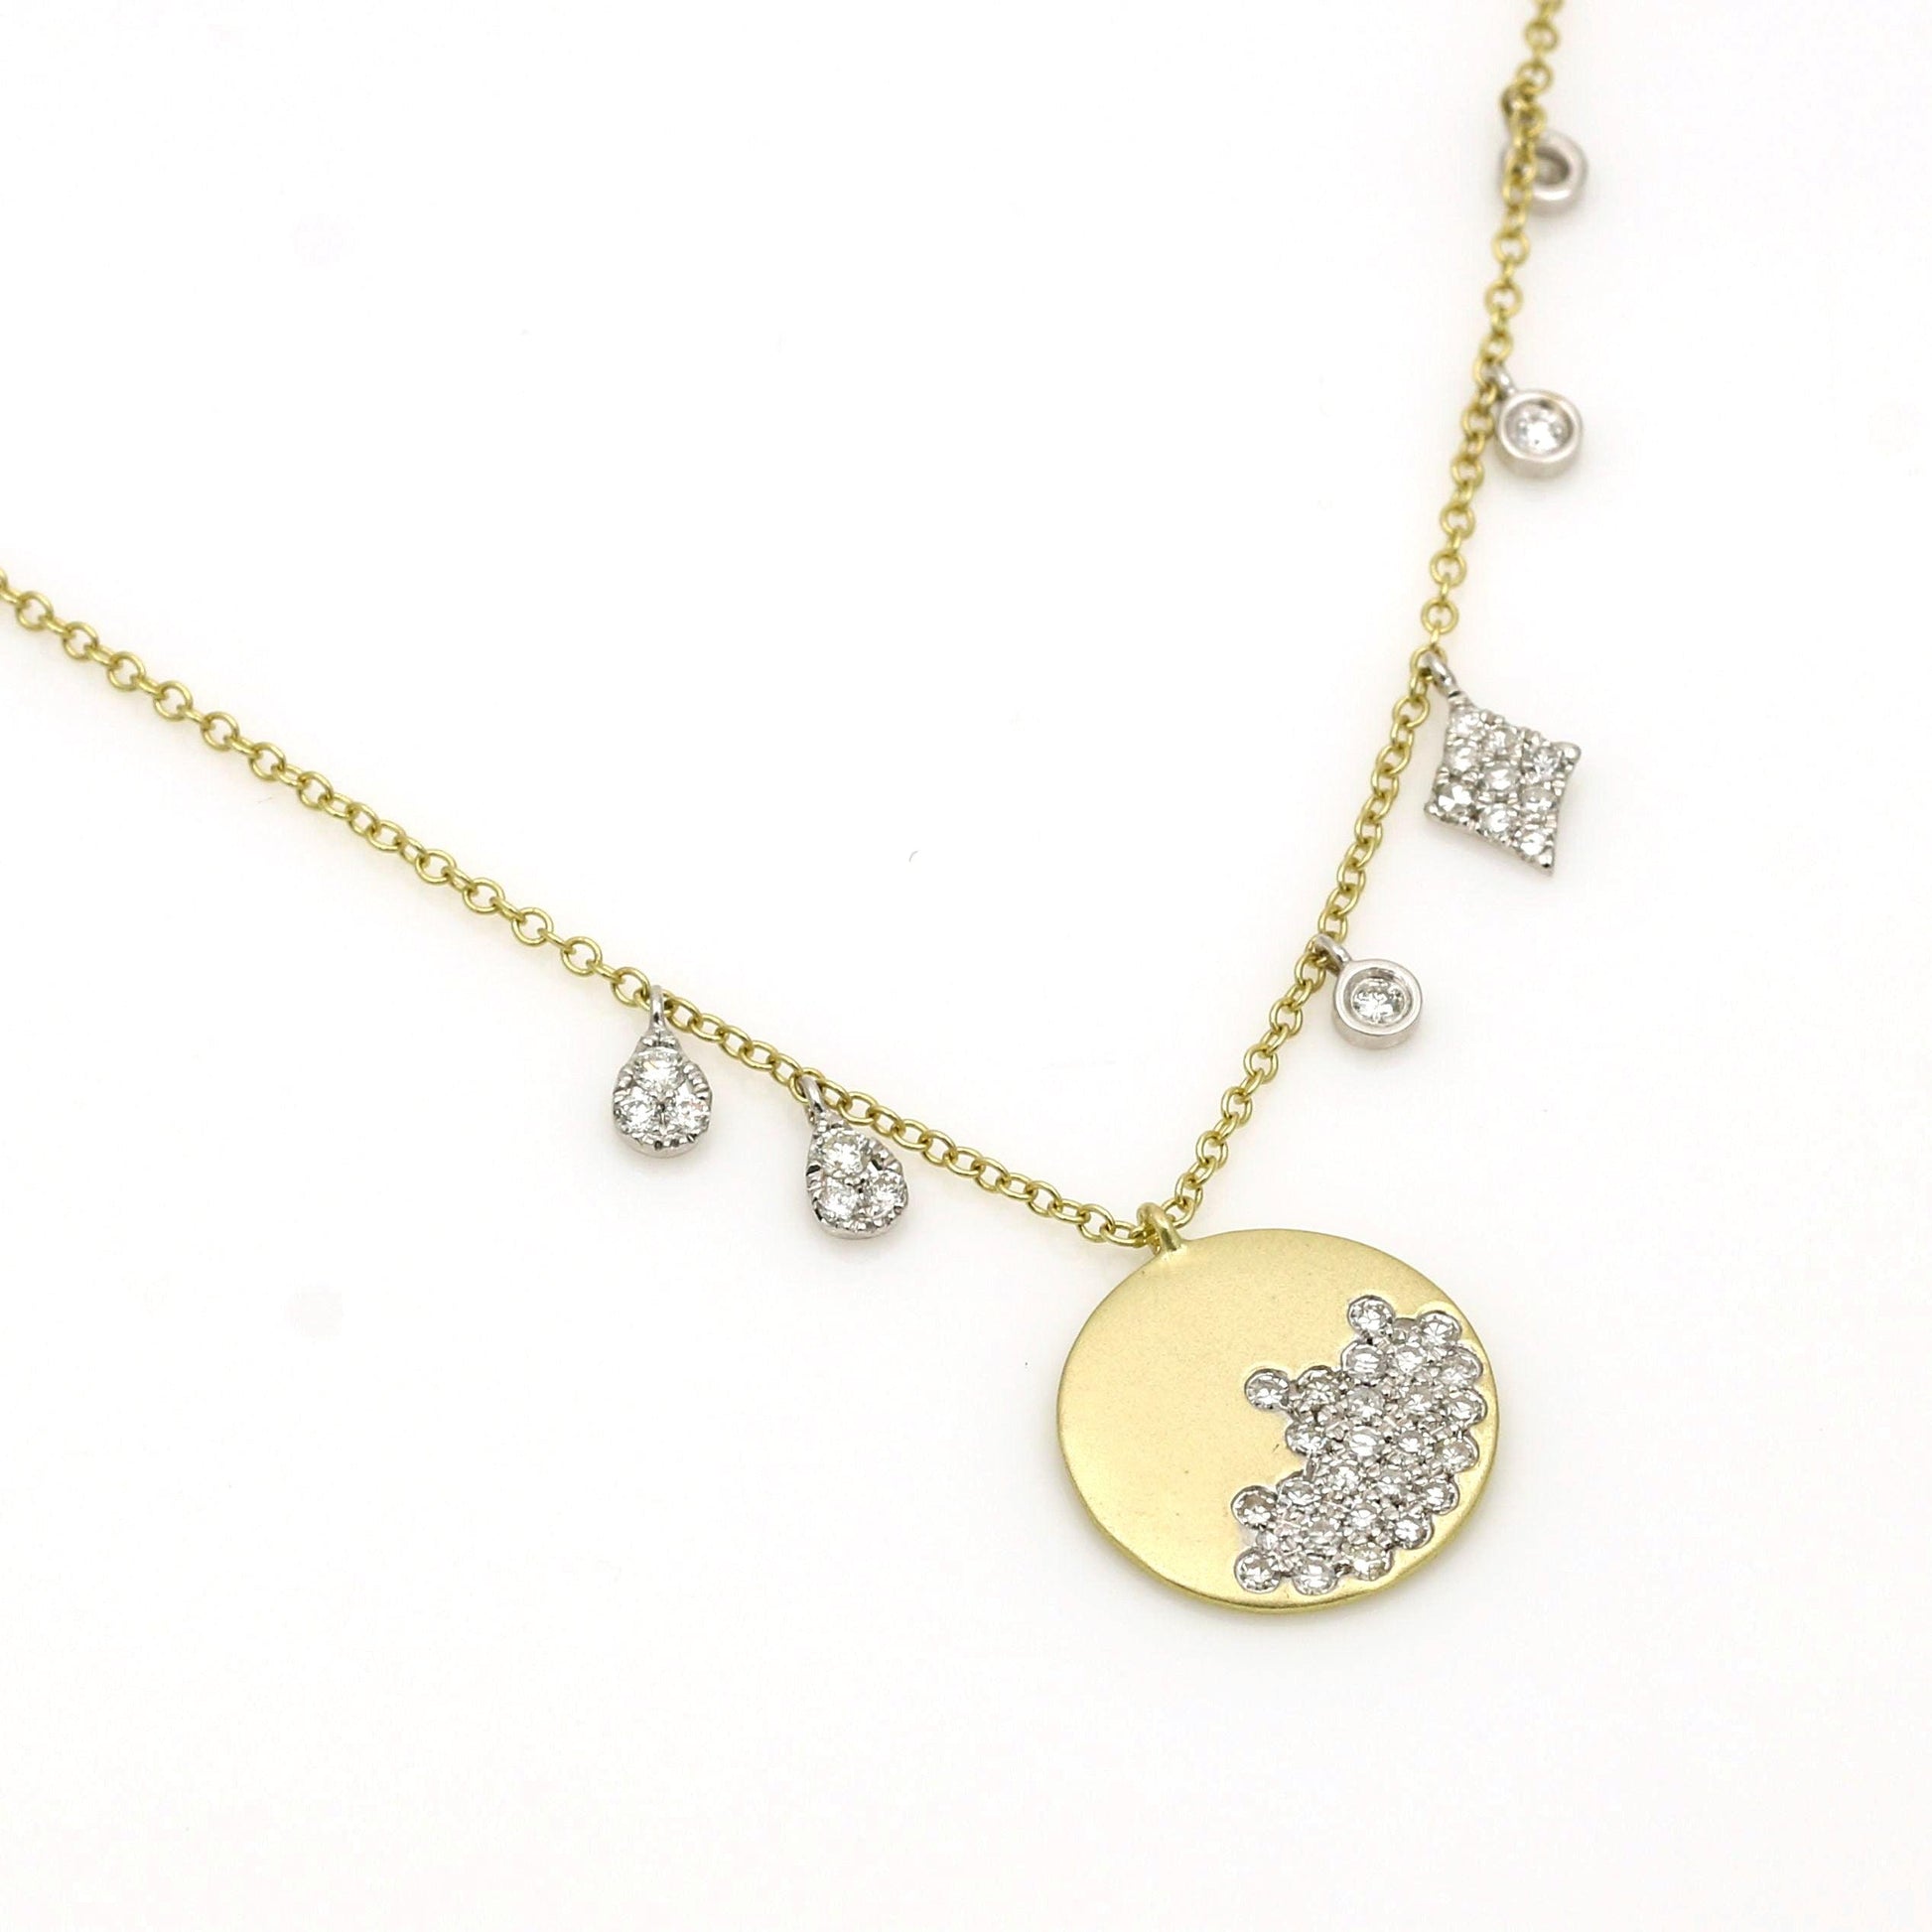 Meira T Brushed 14k Gold and Diamonds Necklace with Dangling Charms - 31 Jewels Inc.